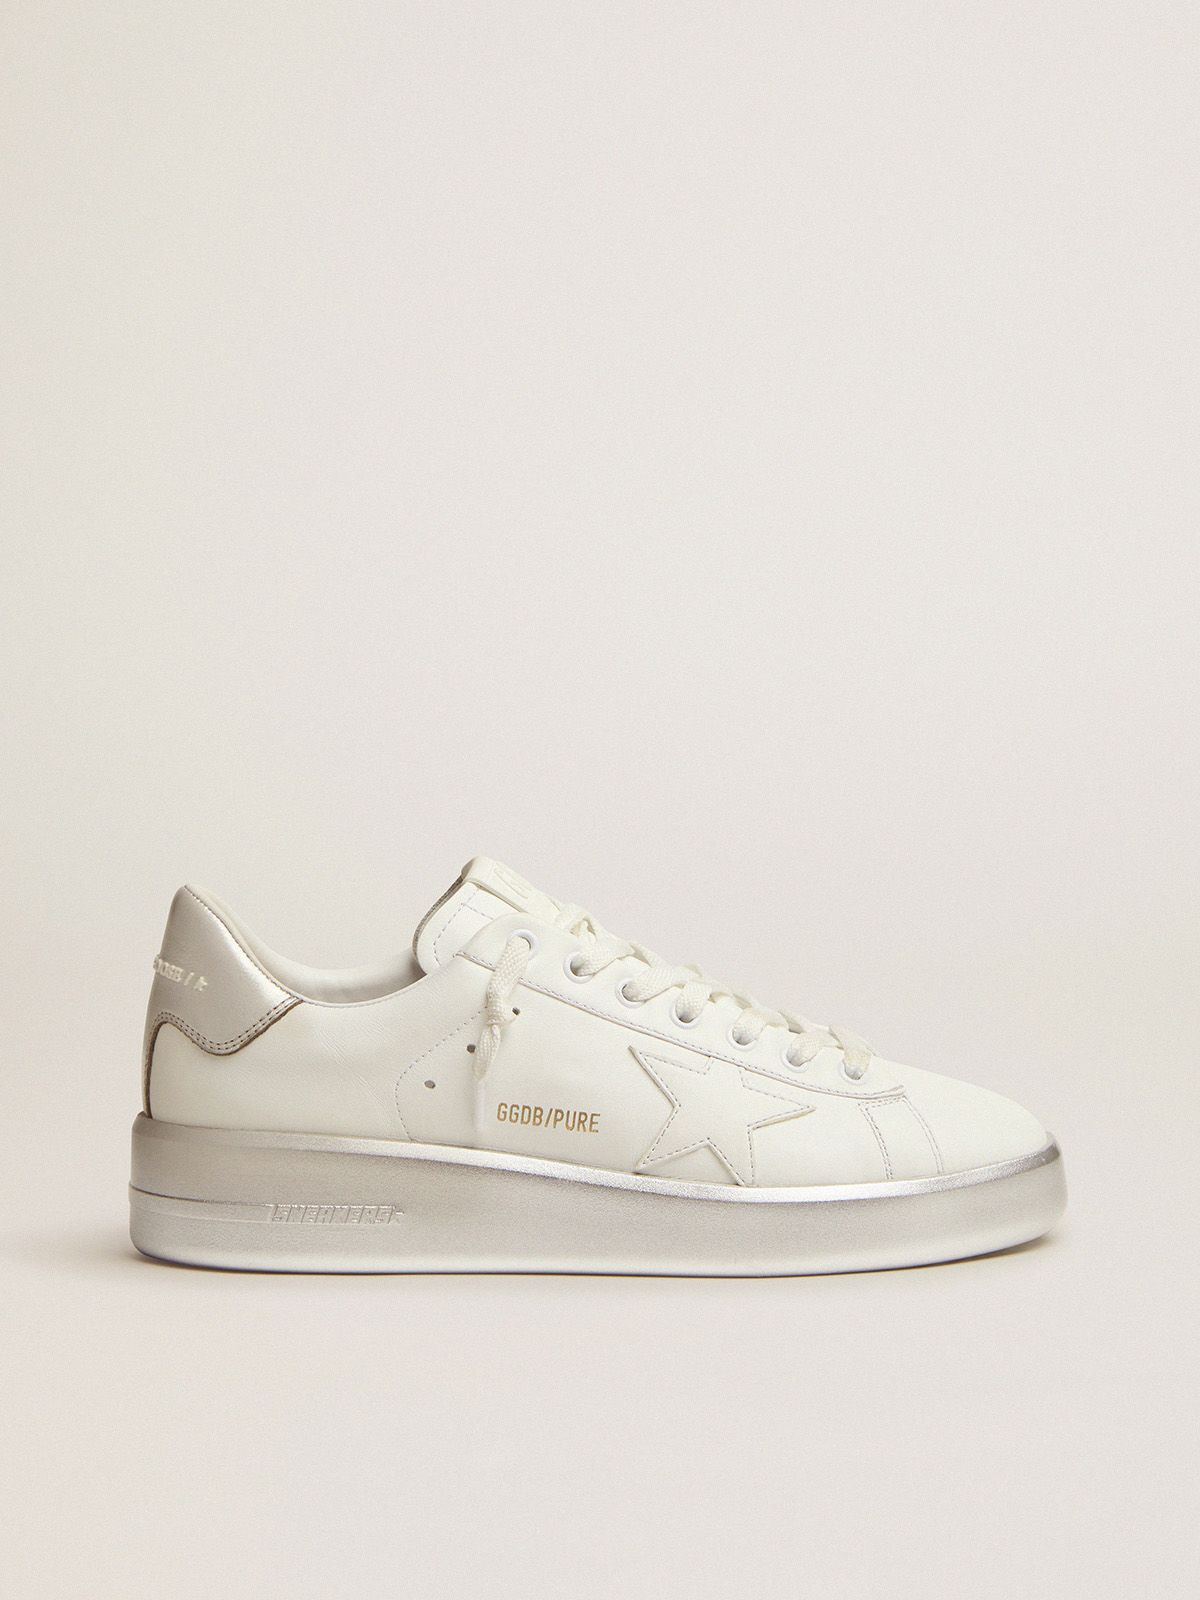 golden goose tab sneakers and foxing leather with silver in heel Purestar white laminated